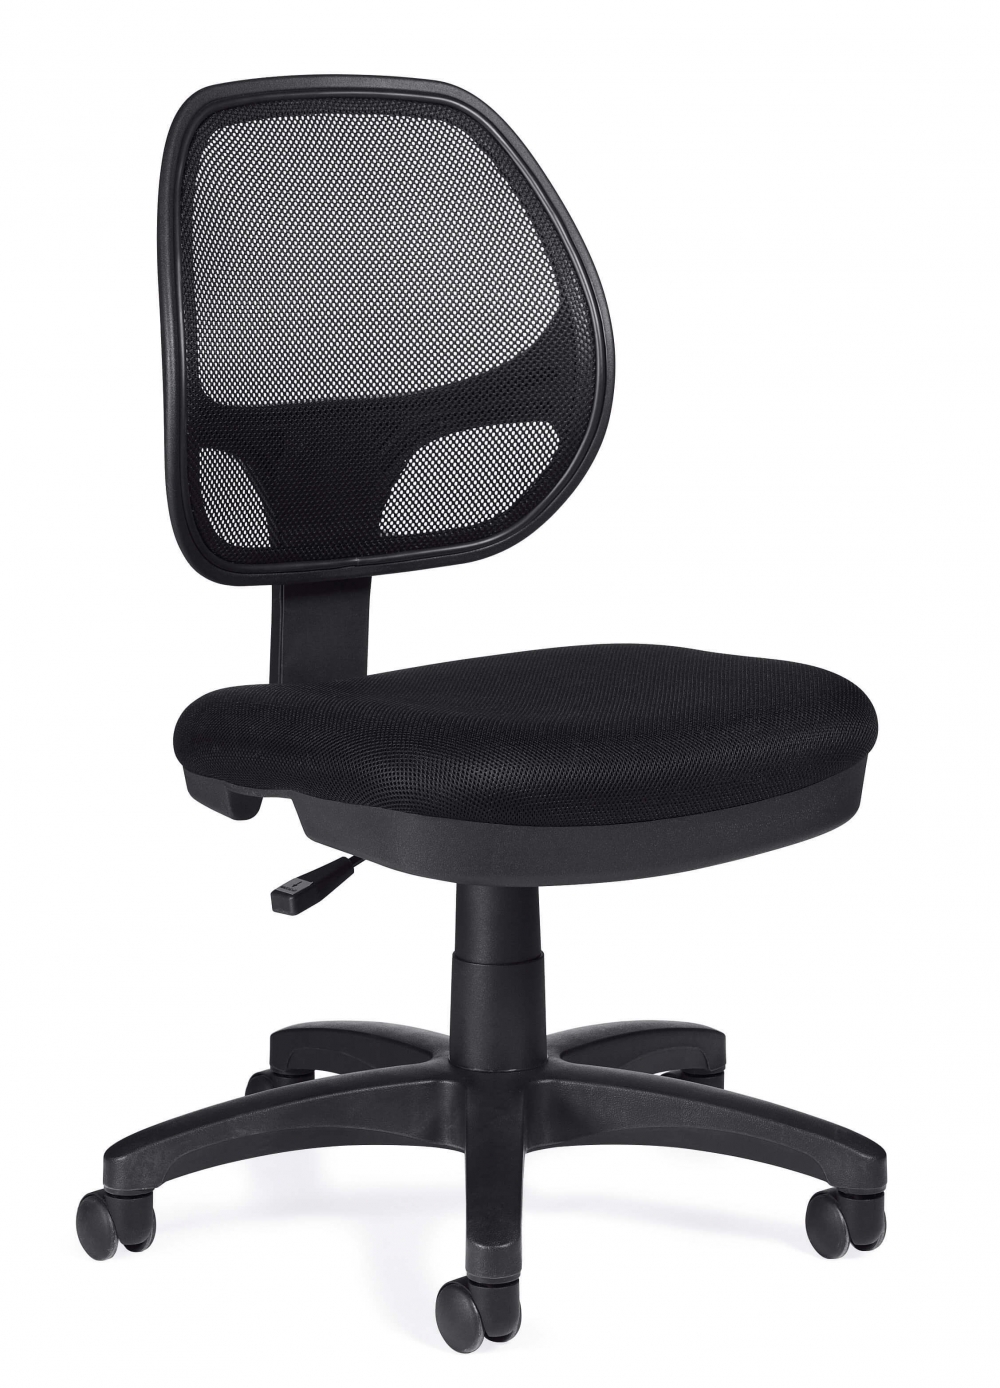 office-furniture-chairs-affordable-office-chairs.jpg